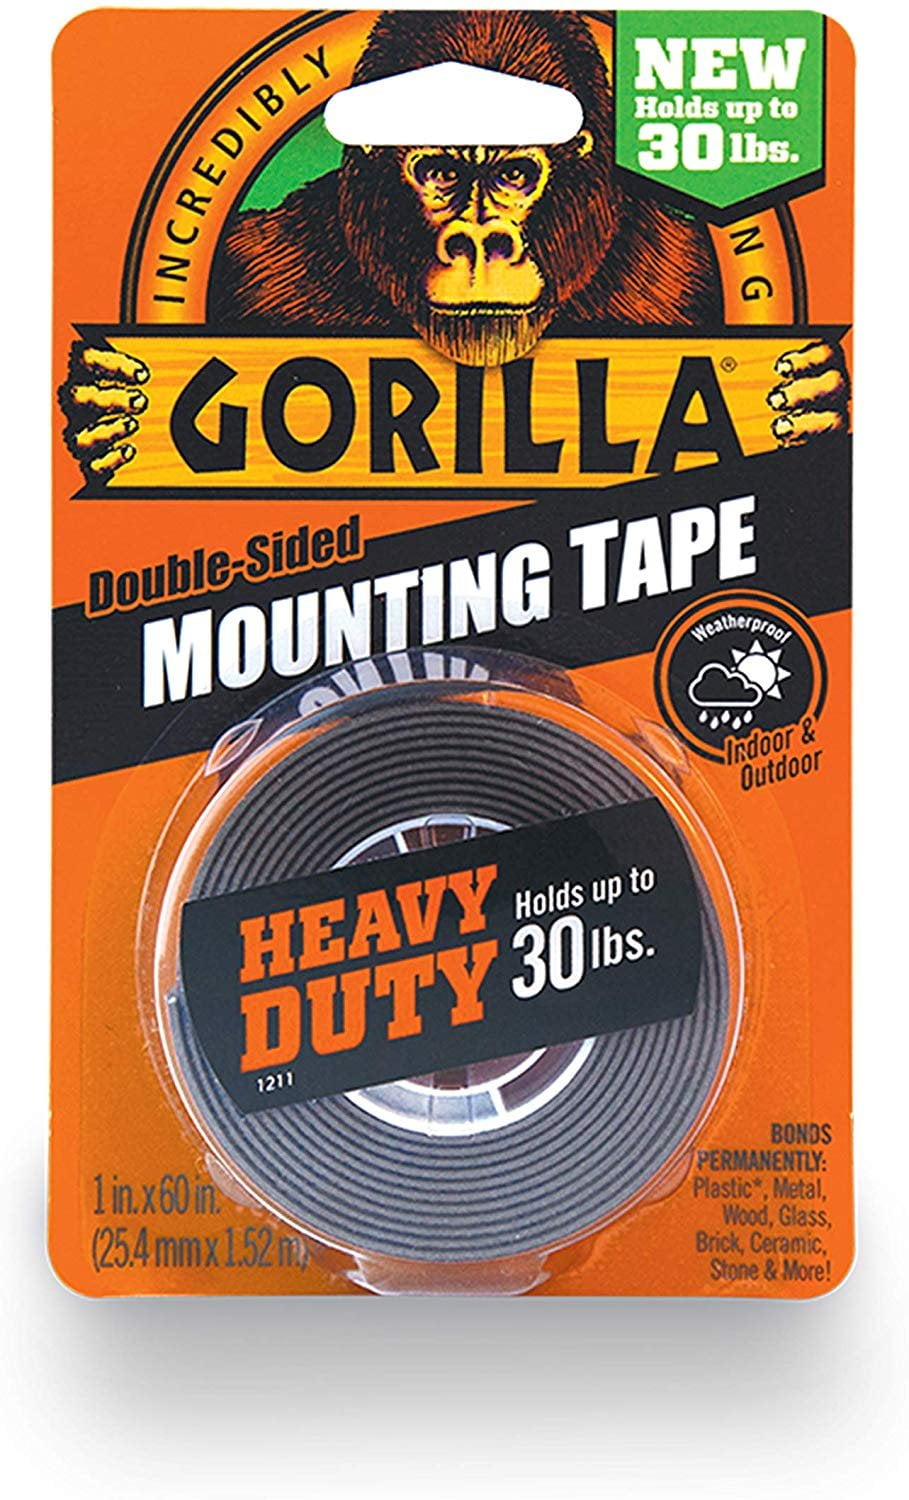 Pack of 12 1 x 120 Black Gorilla Heavy Duty Double Sided Mounting Tape XL 